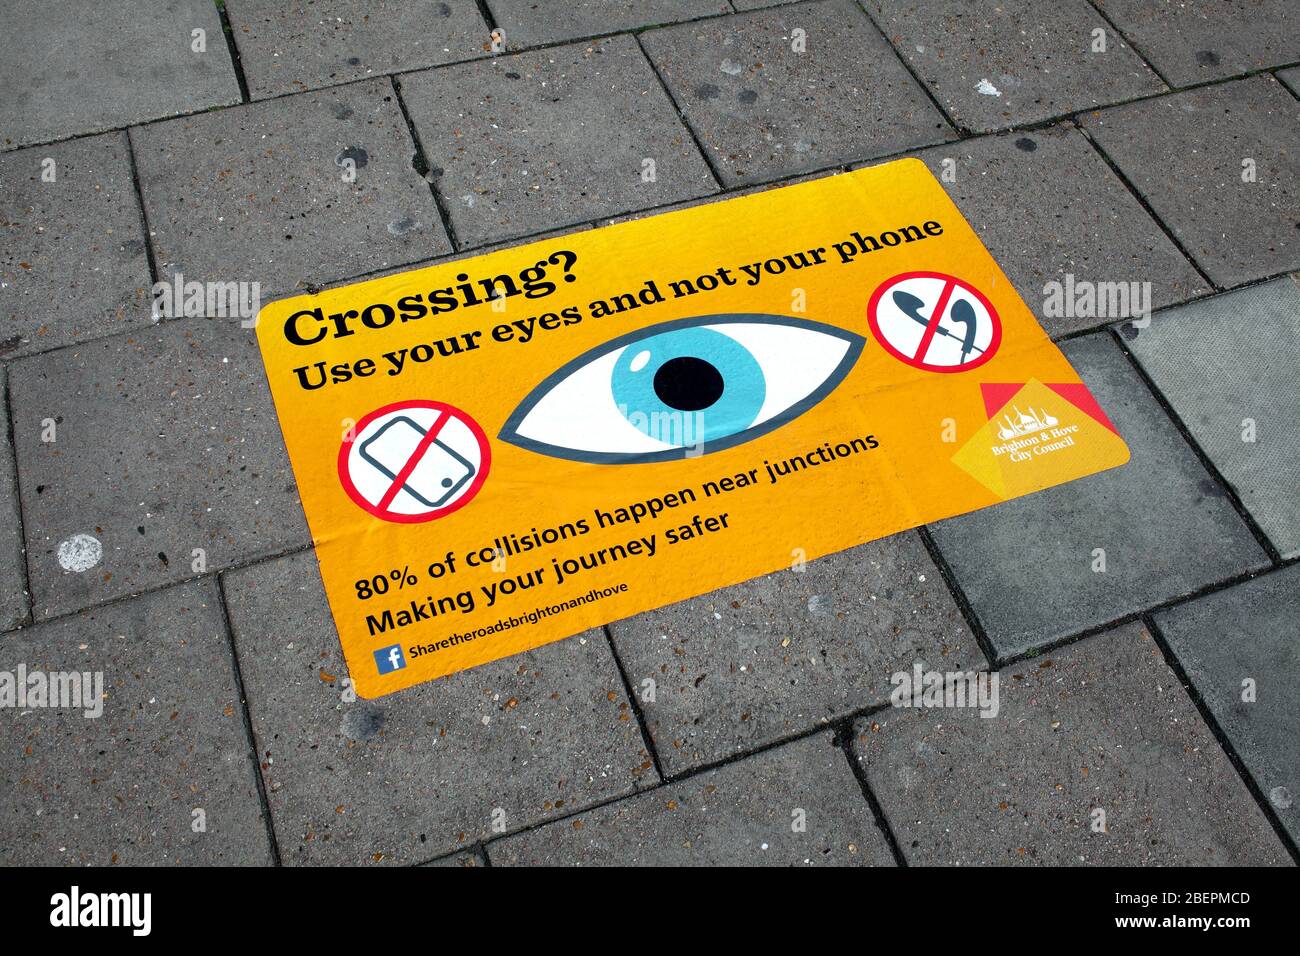 Warning sign, on a pavement, positioned to be seen by people who look down at their phones instead of looking where they are going. Stock Photo